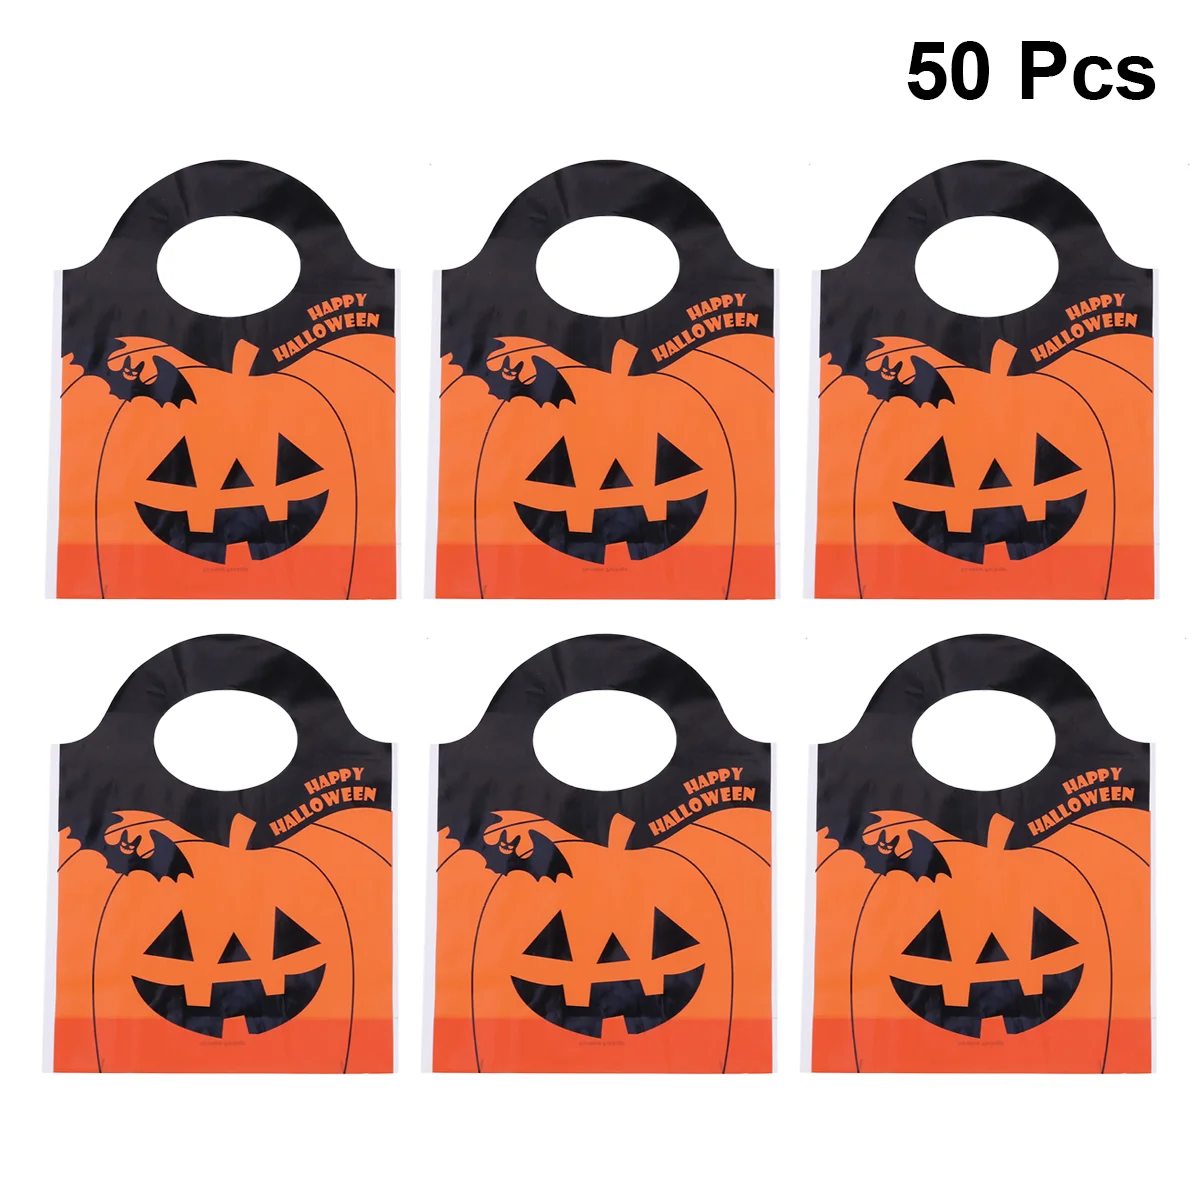 

50 Pumpkin Candy Bags Treat Bags, Trick or Treat Bags Goodie Bags, Orange Tote Bags Party Favors Gift Bags, 5 x 19 5